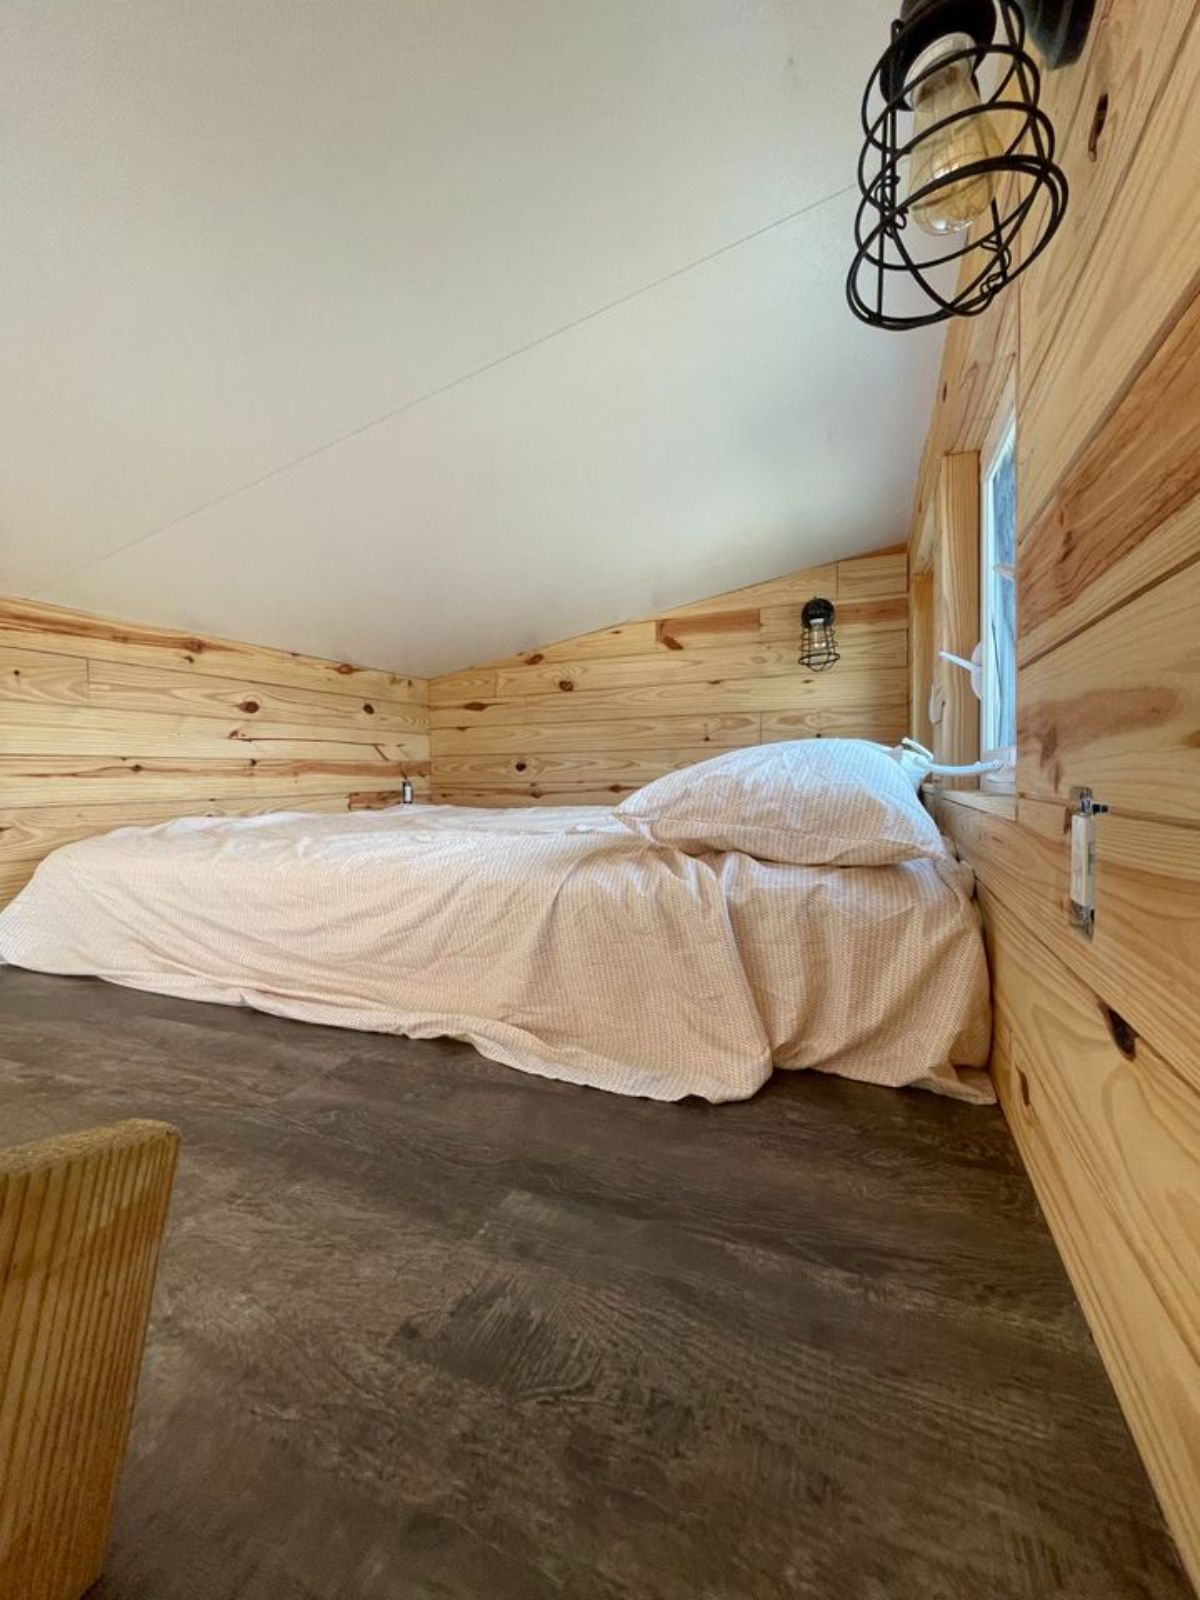 Master loft of 24’ Tiny House on Wheels has a queen sized bed.